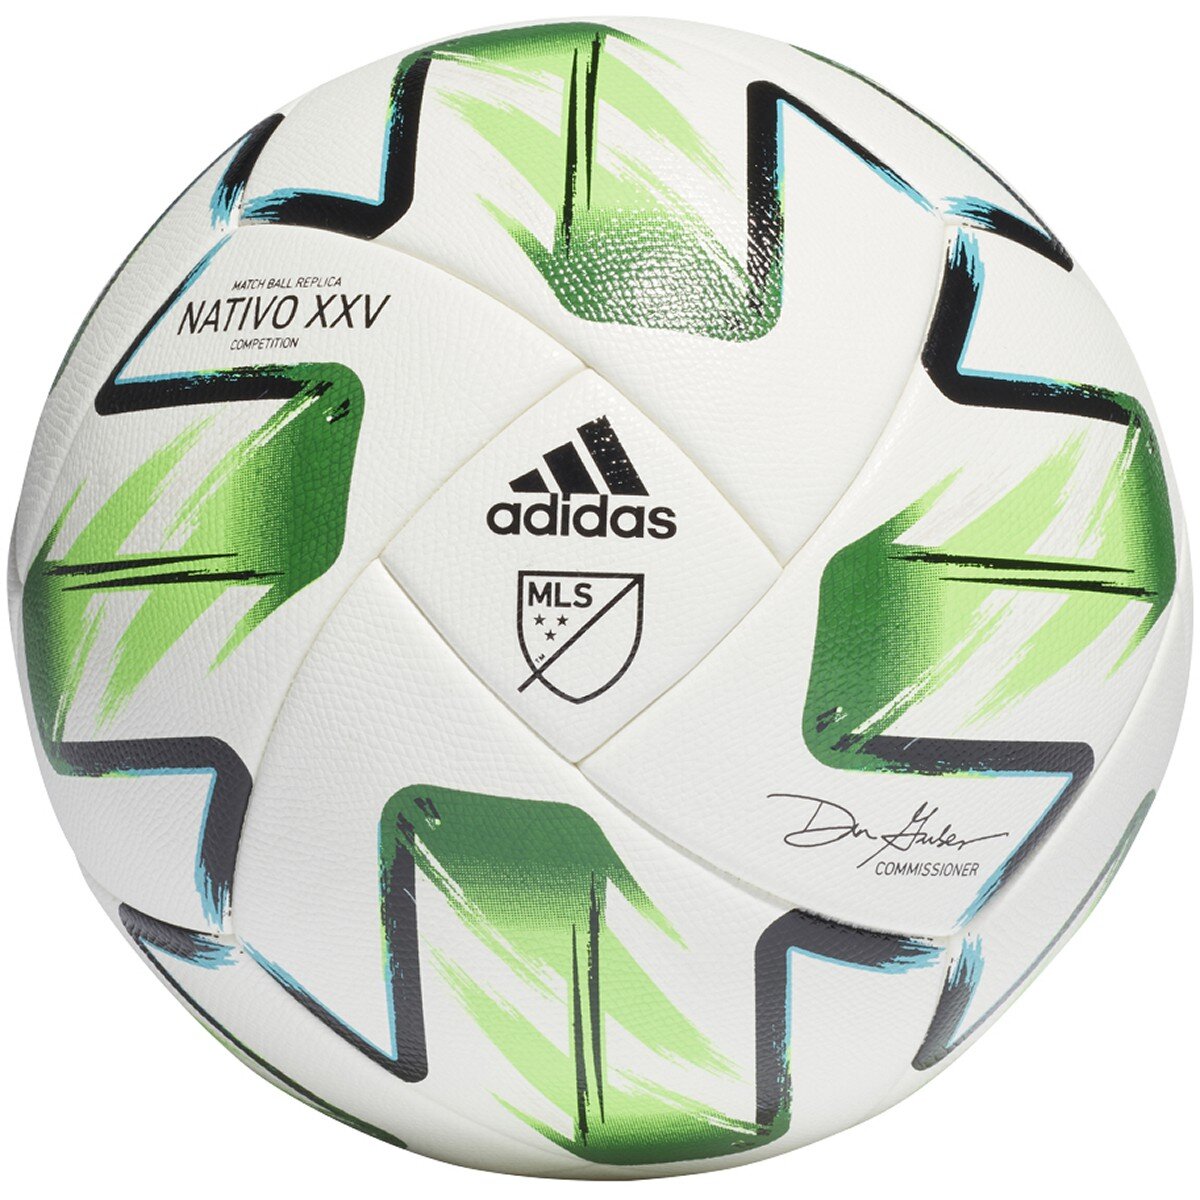 mls official game ball